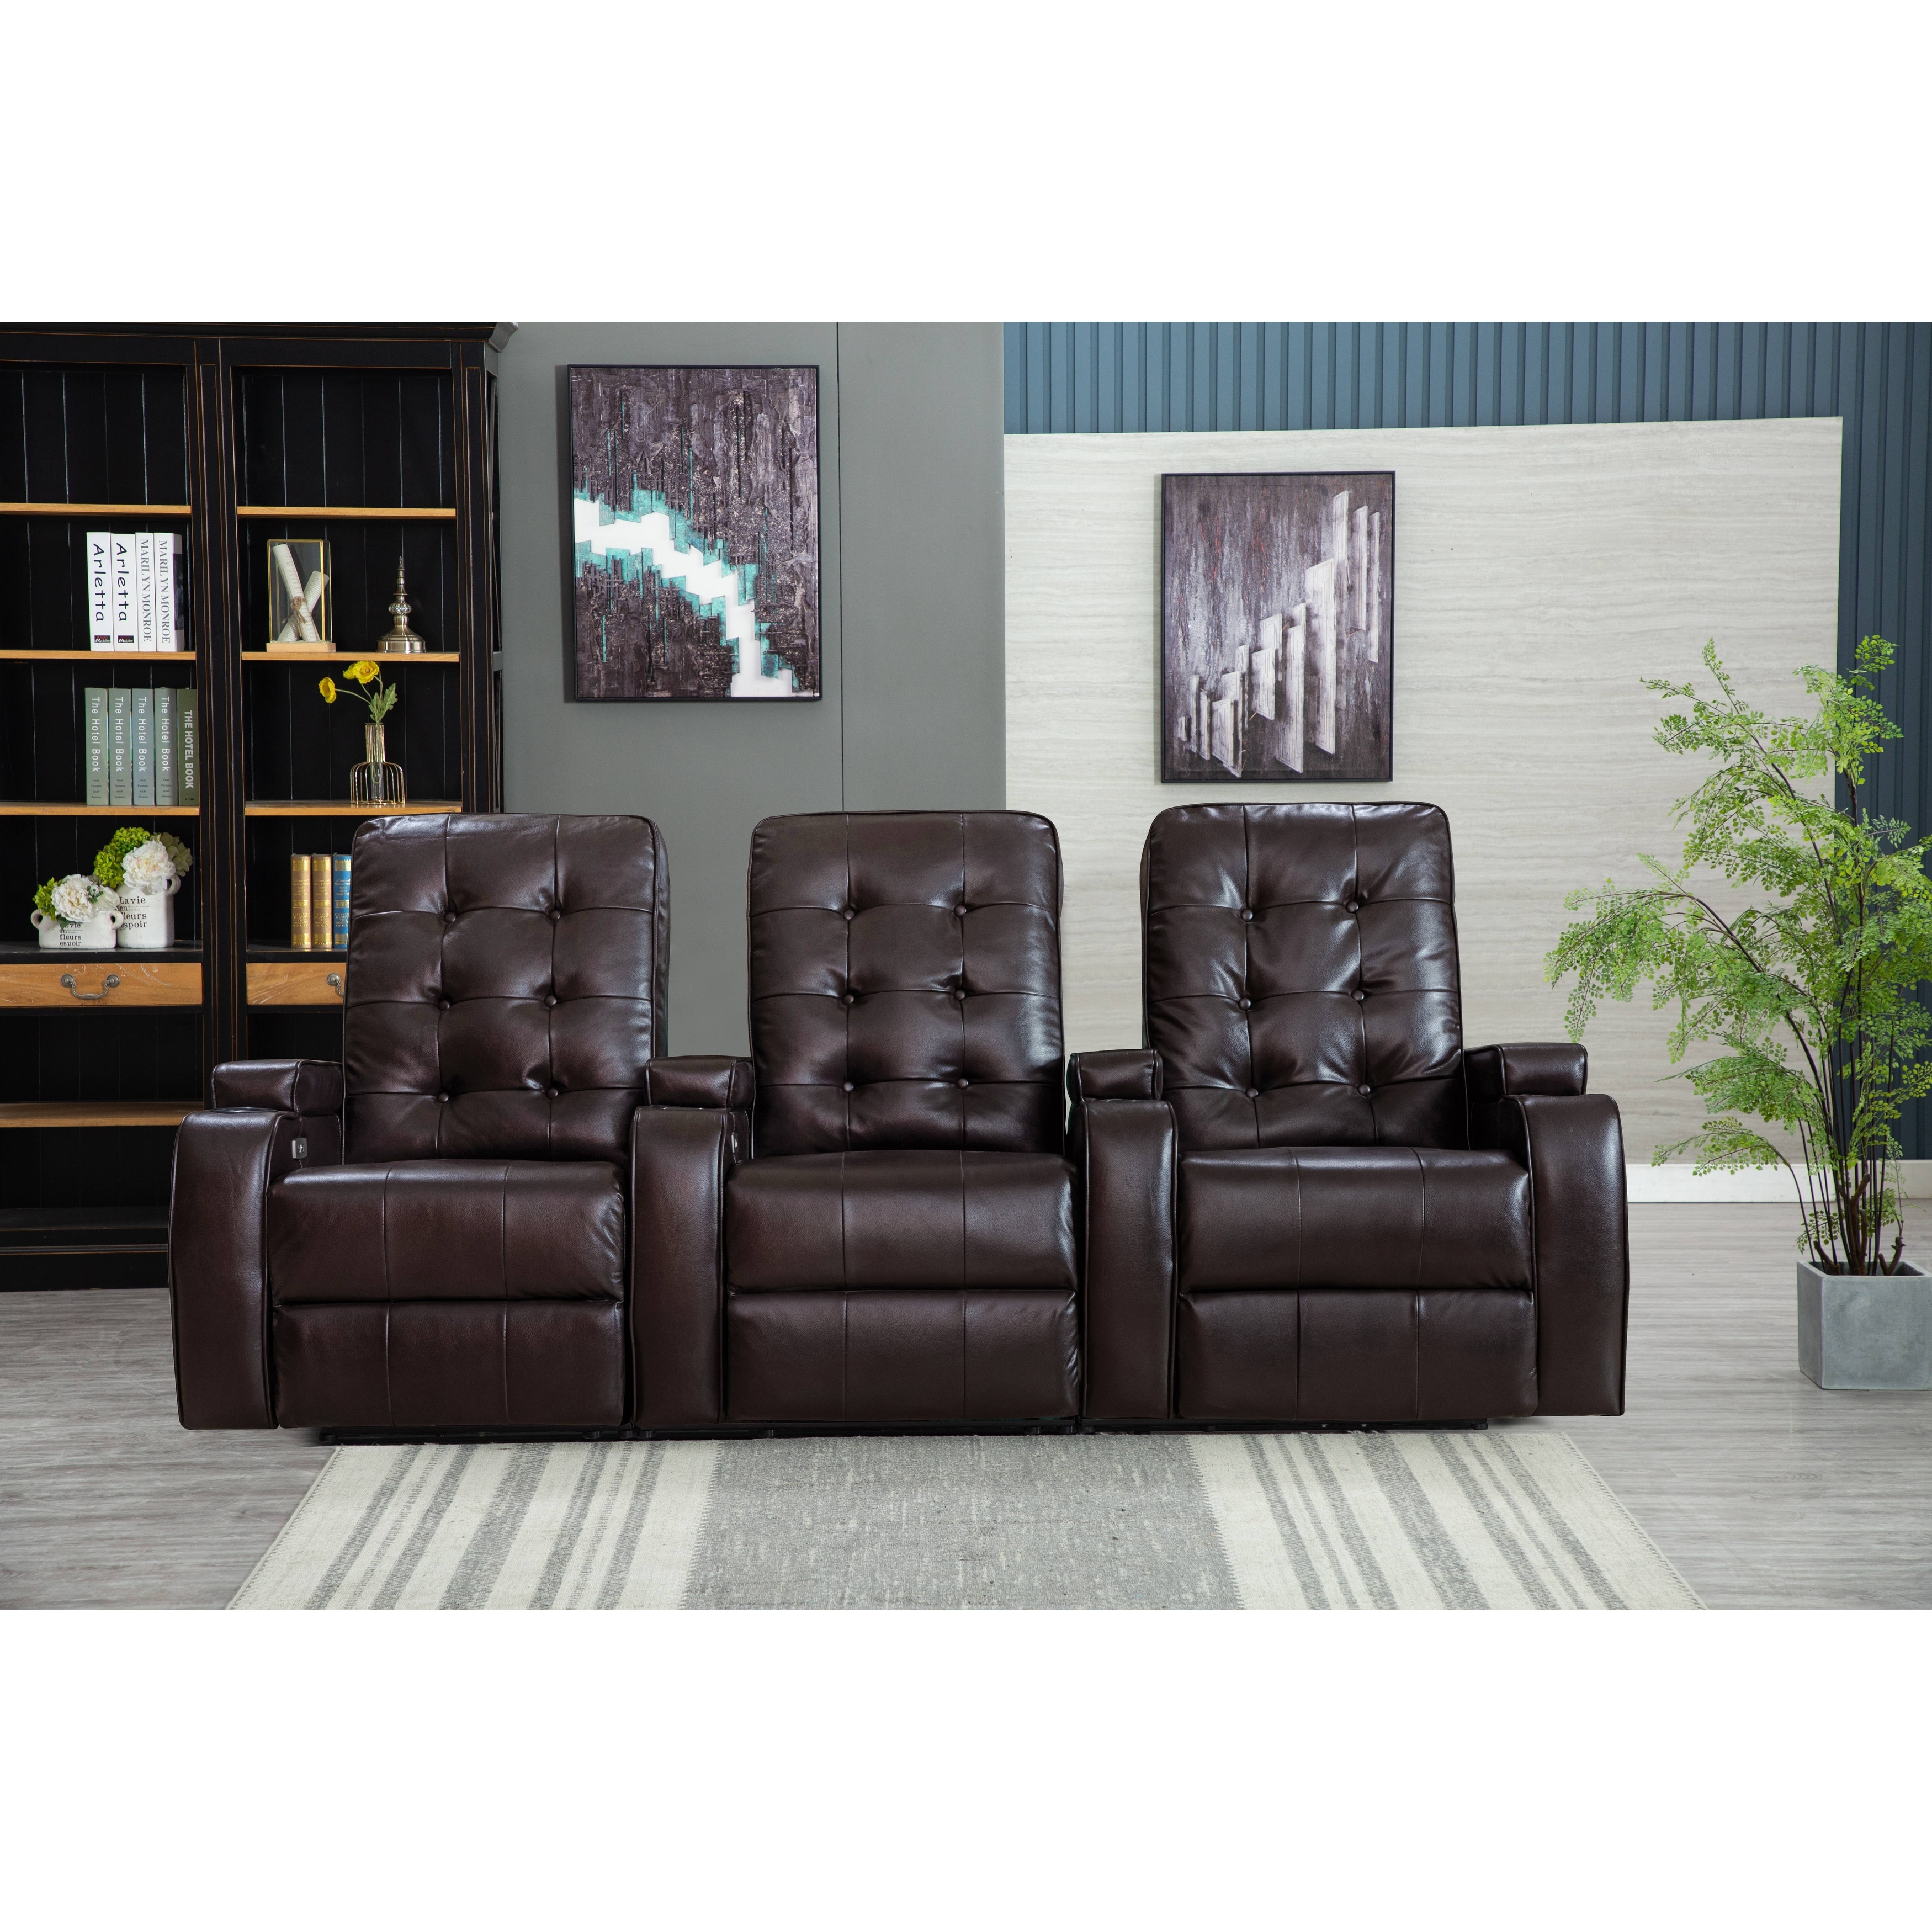 Recliner Sofa Home Theater Seating with Lumbar Support Manual Push Back  Recliners,PU Leather